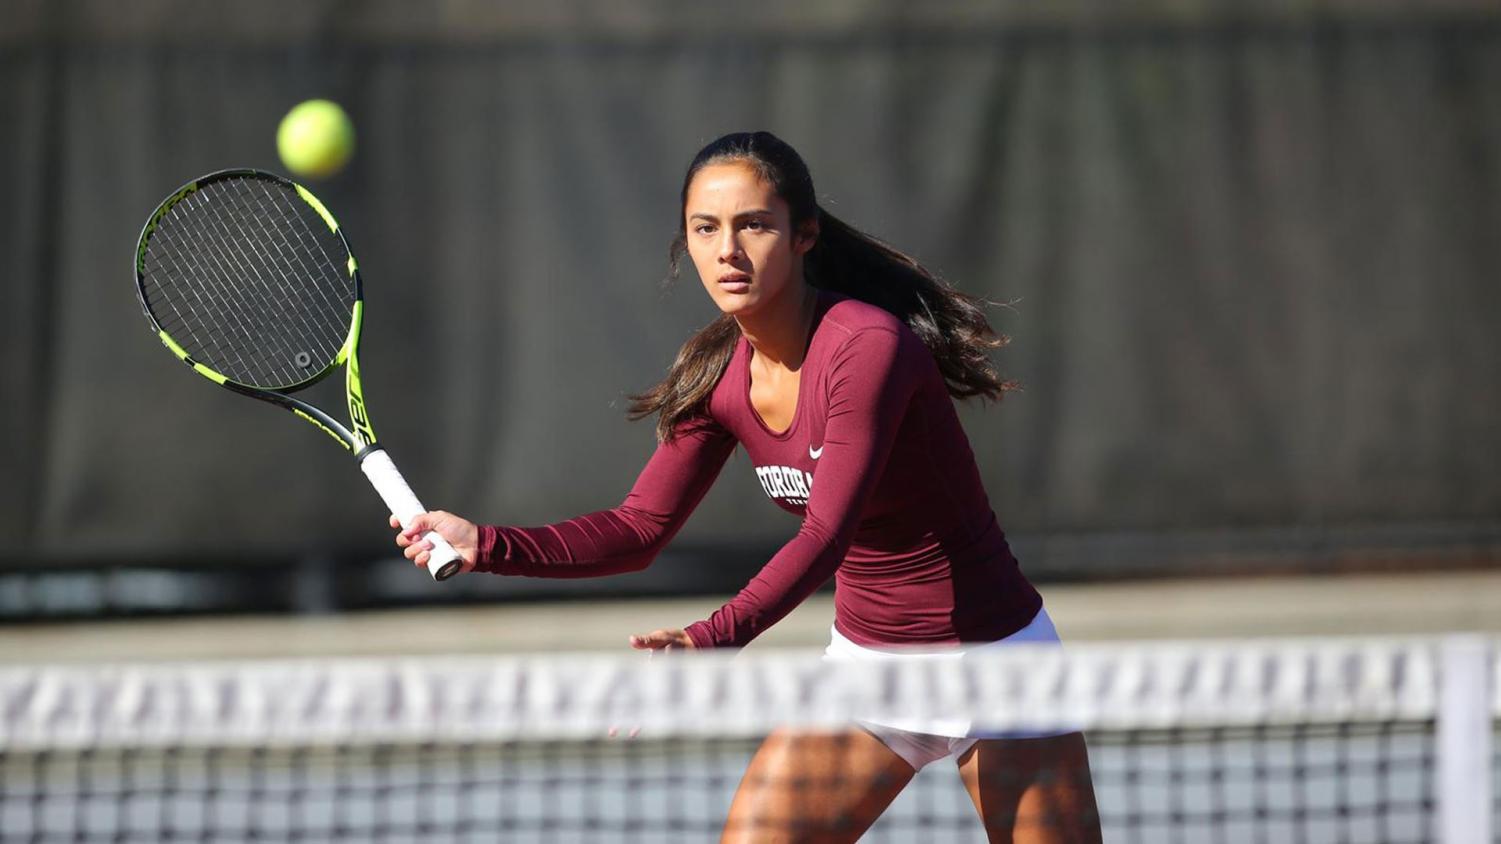 Women’s Tennis’ four-match winning streak came to an end with the loss to LIU-Brooklyn. (Courtesy of Fordham Athletics)